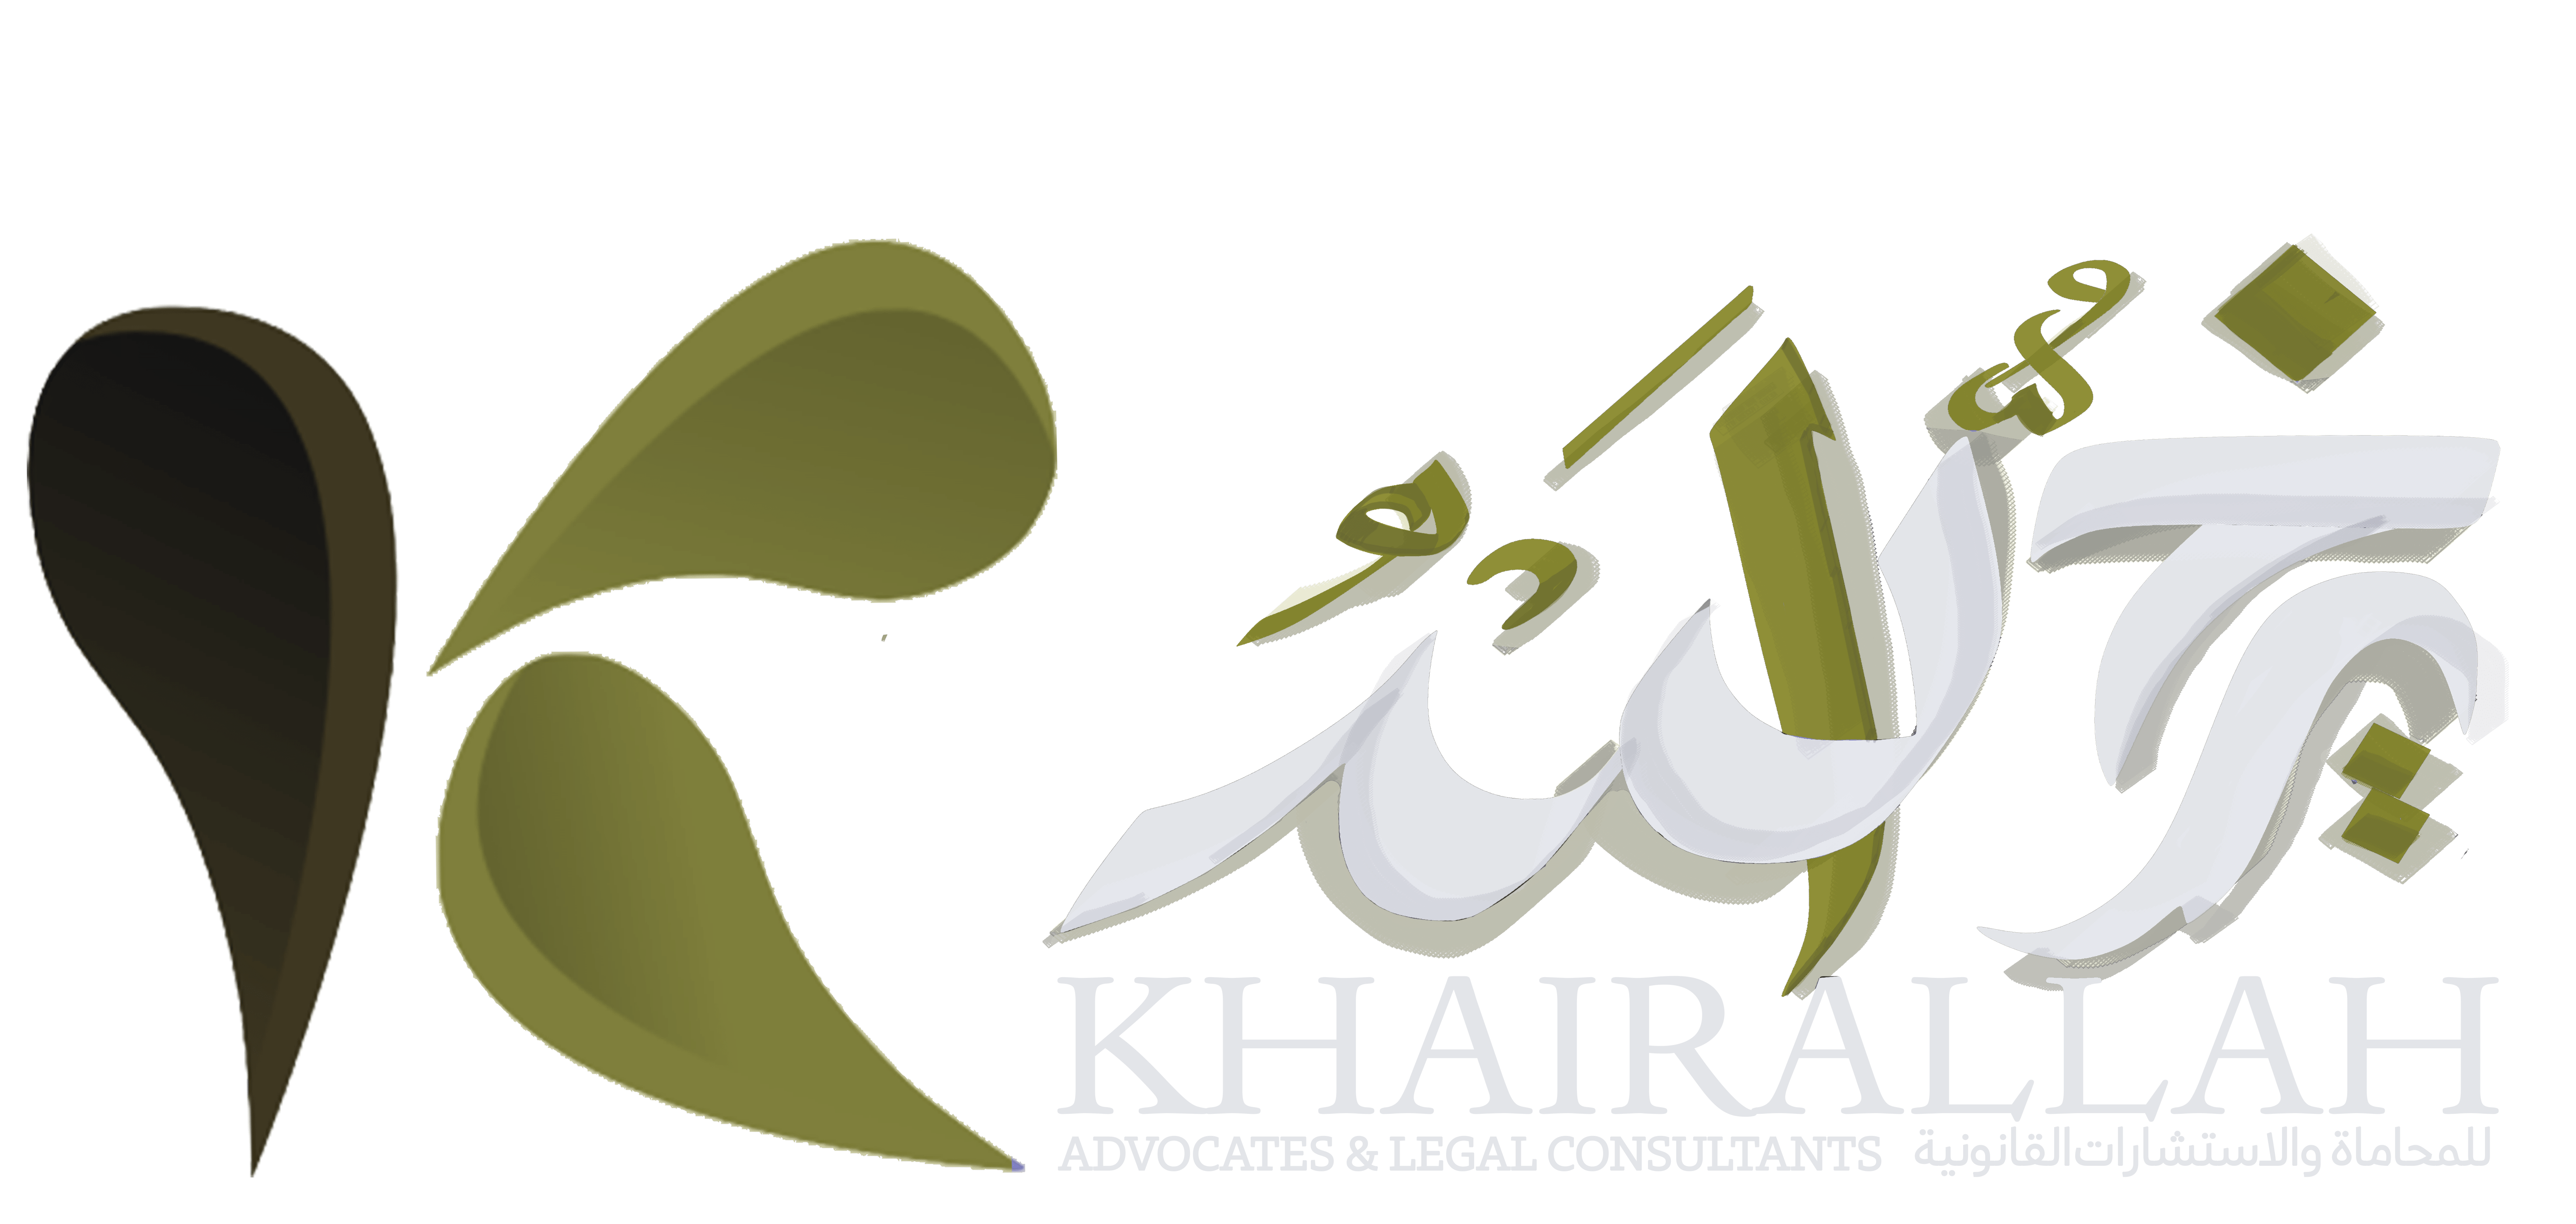 Khairallah Advocates & Legal Consultants addresses cross-border legal cases through global partnerships with major international law firms